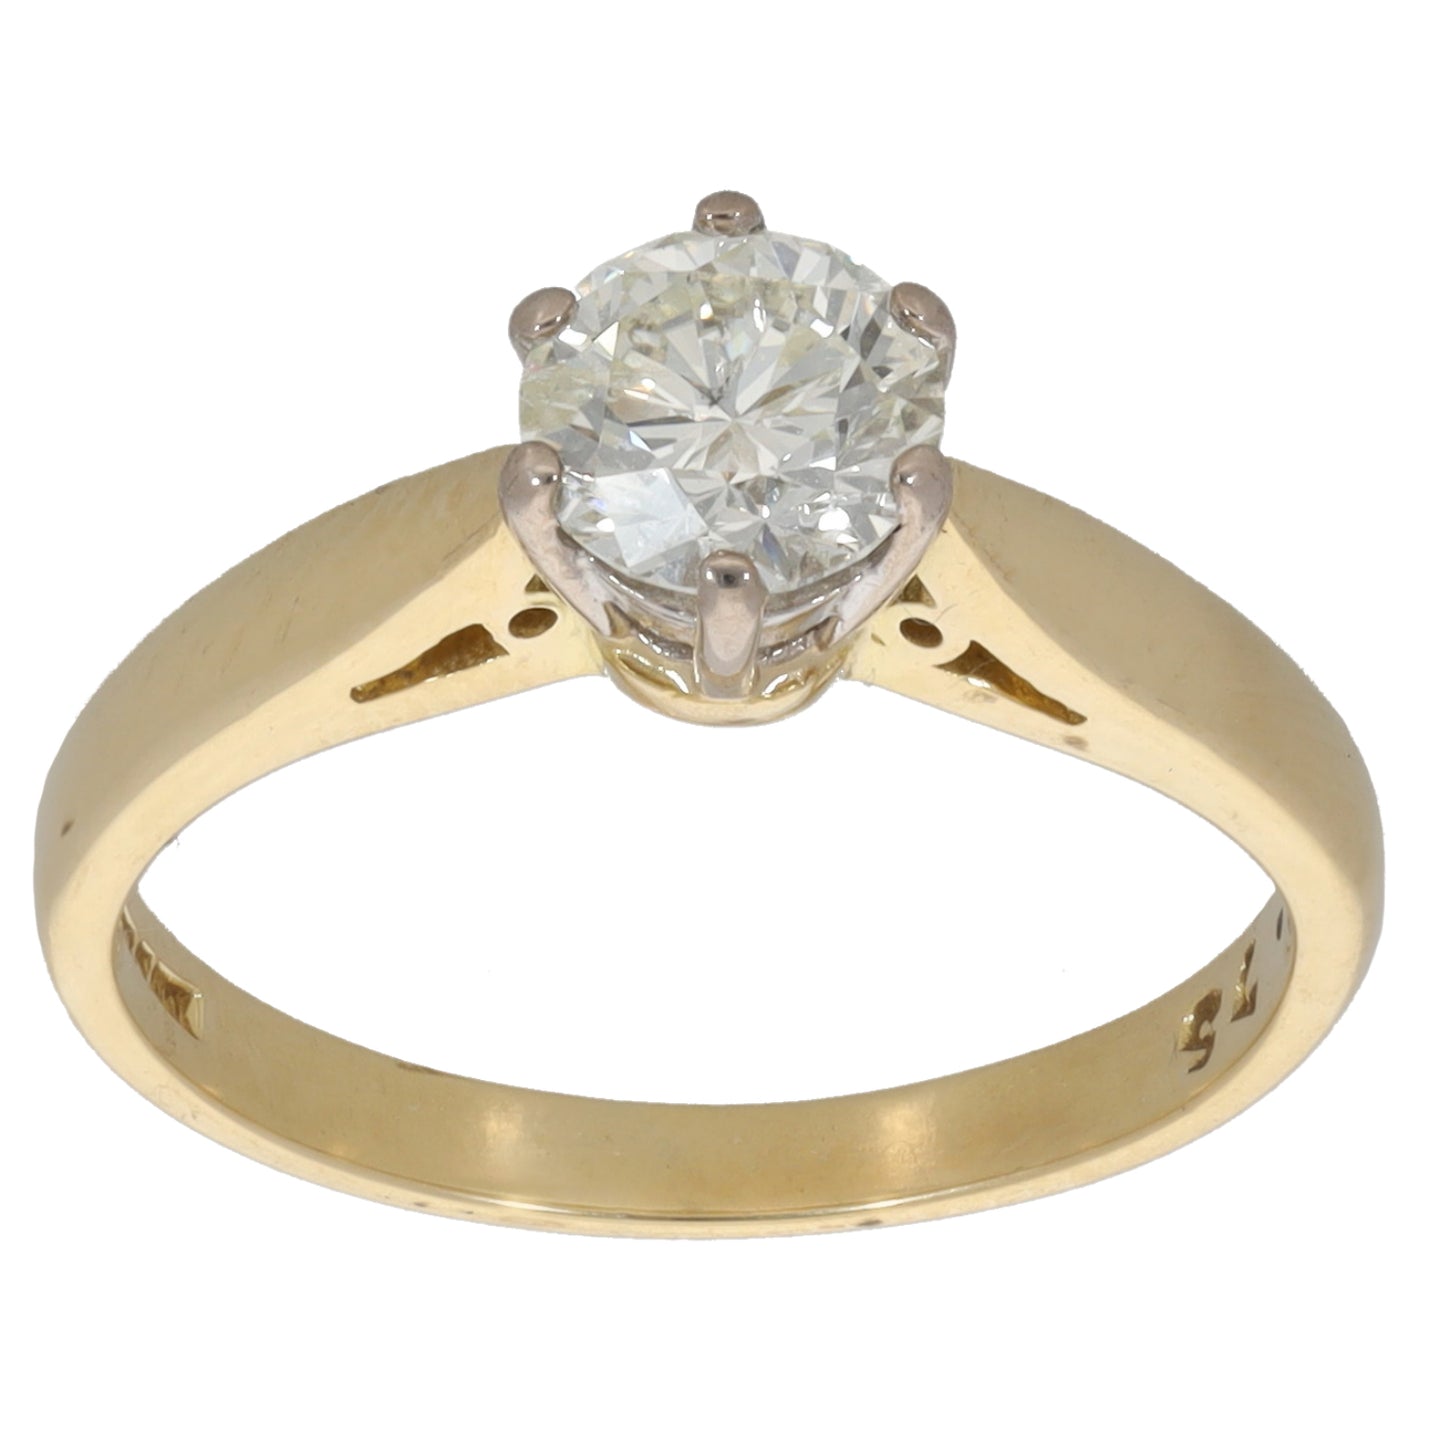 18ct Gold 0.75ct Diamond Solitaire Ring Size K